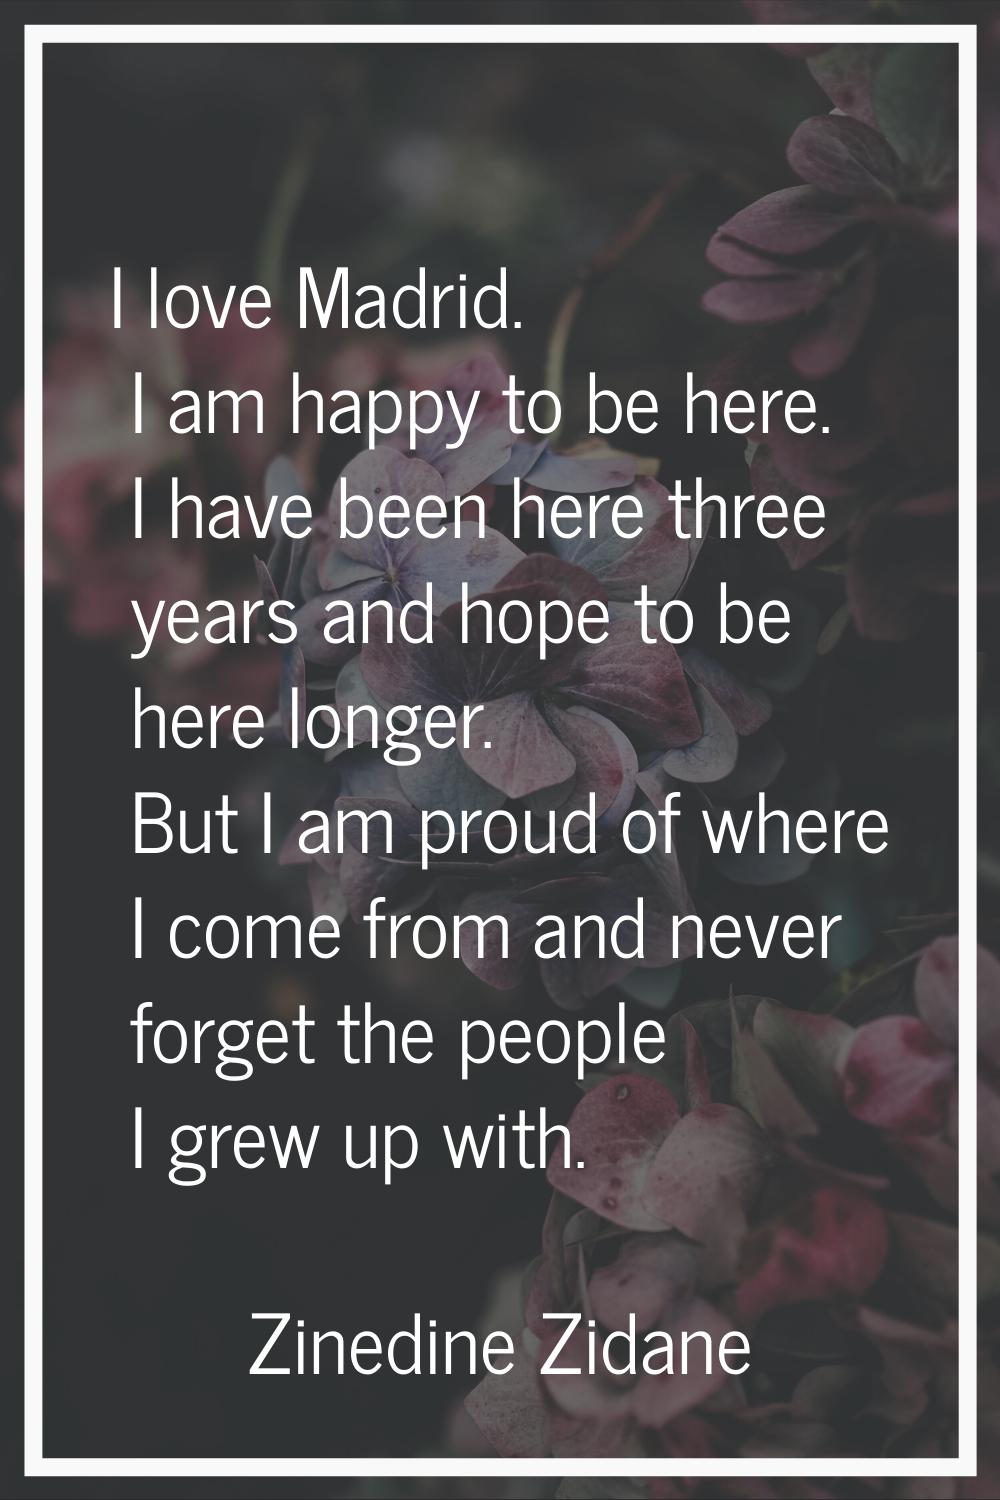 I love Madrid. I am happy to be here. I have been here three years and hope to be here longer. But 